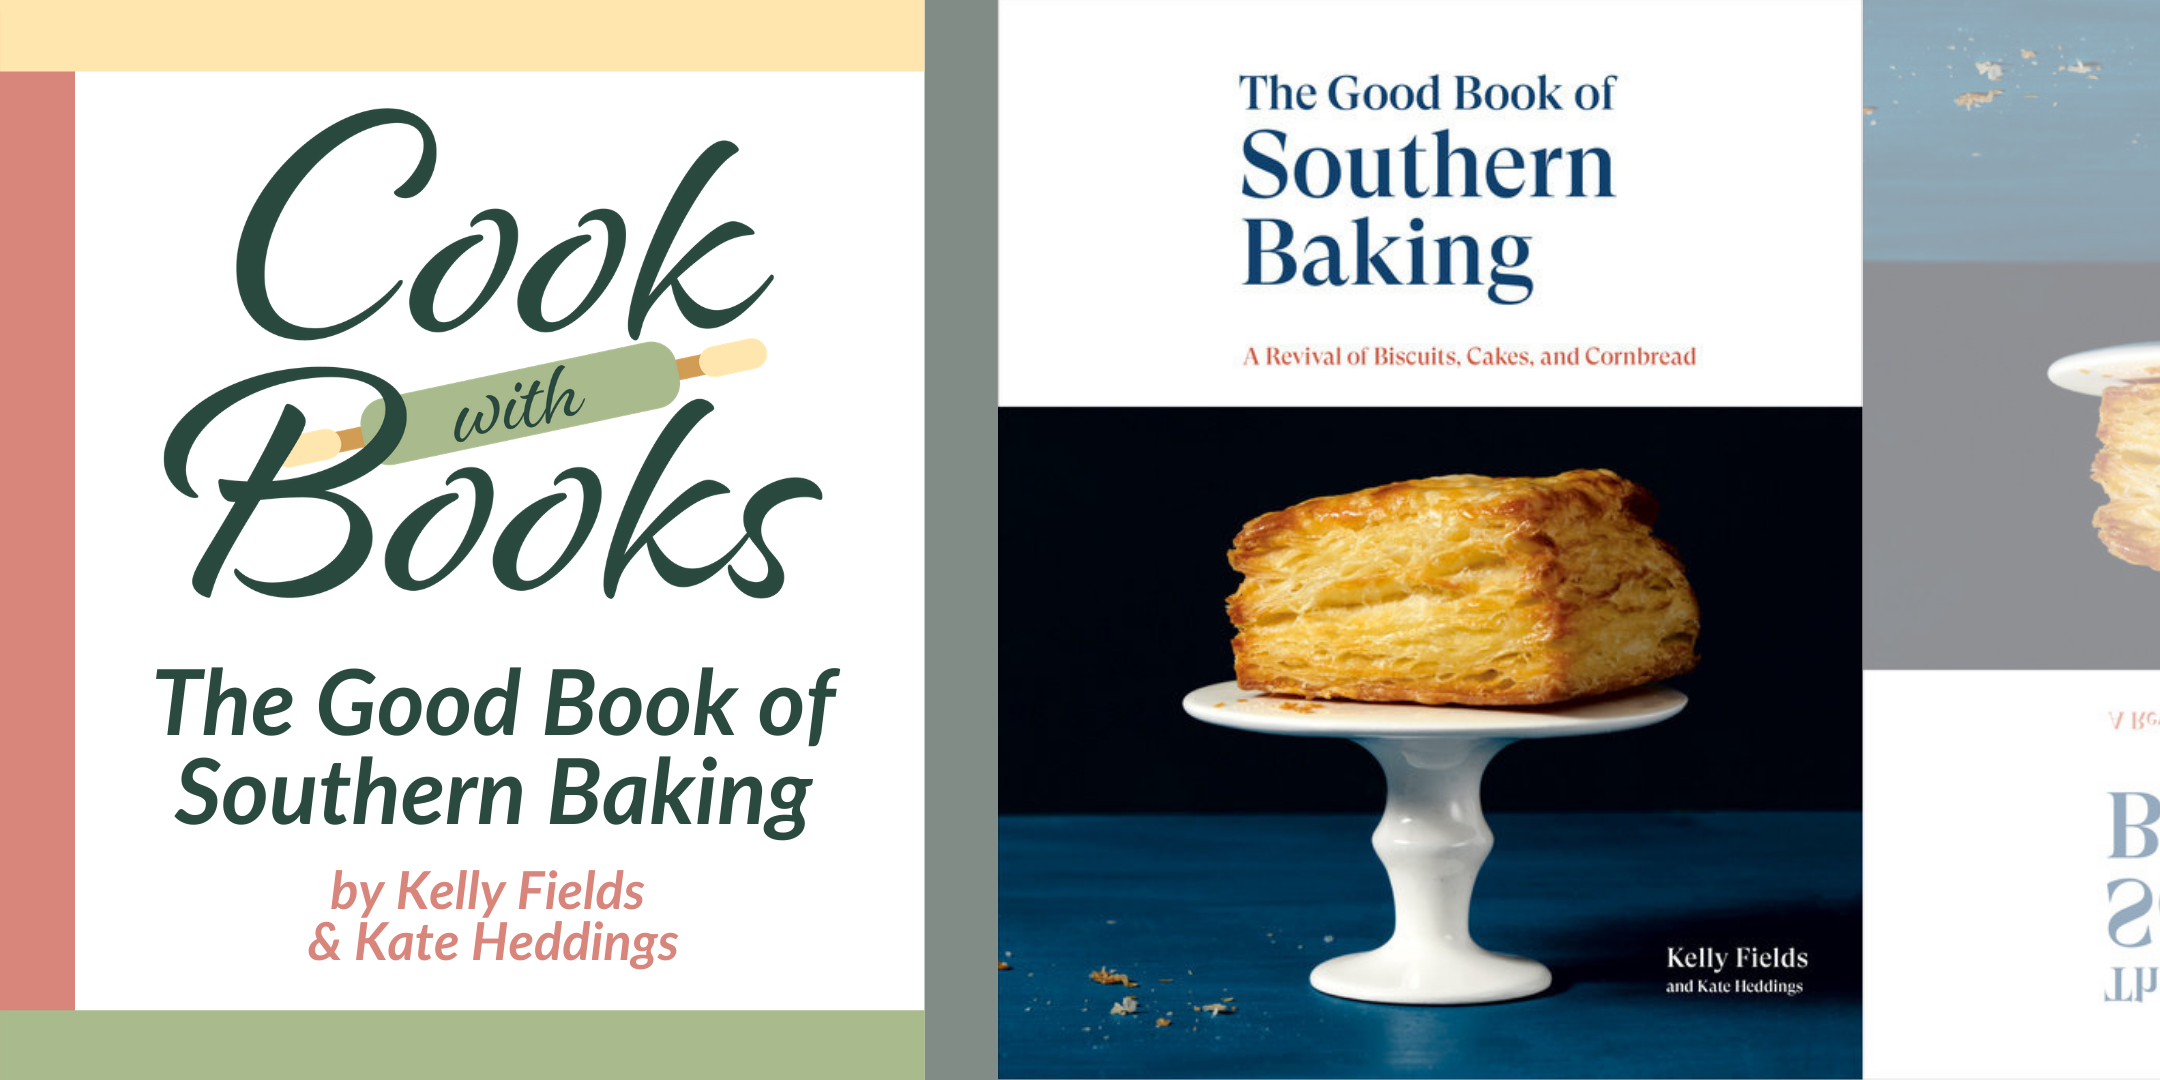 Cook with Books: The Good Book of Southern Baking image